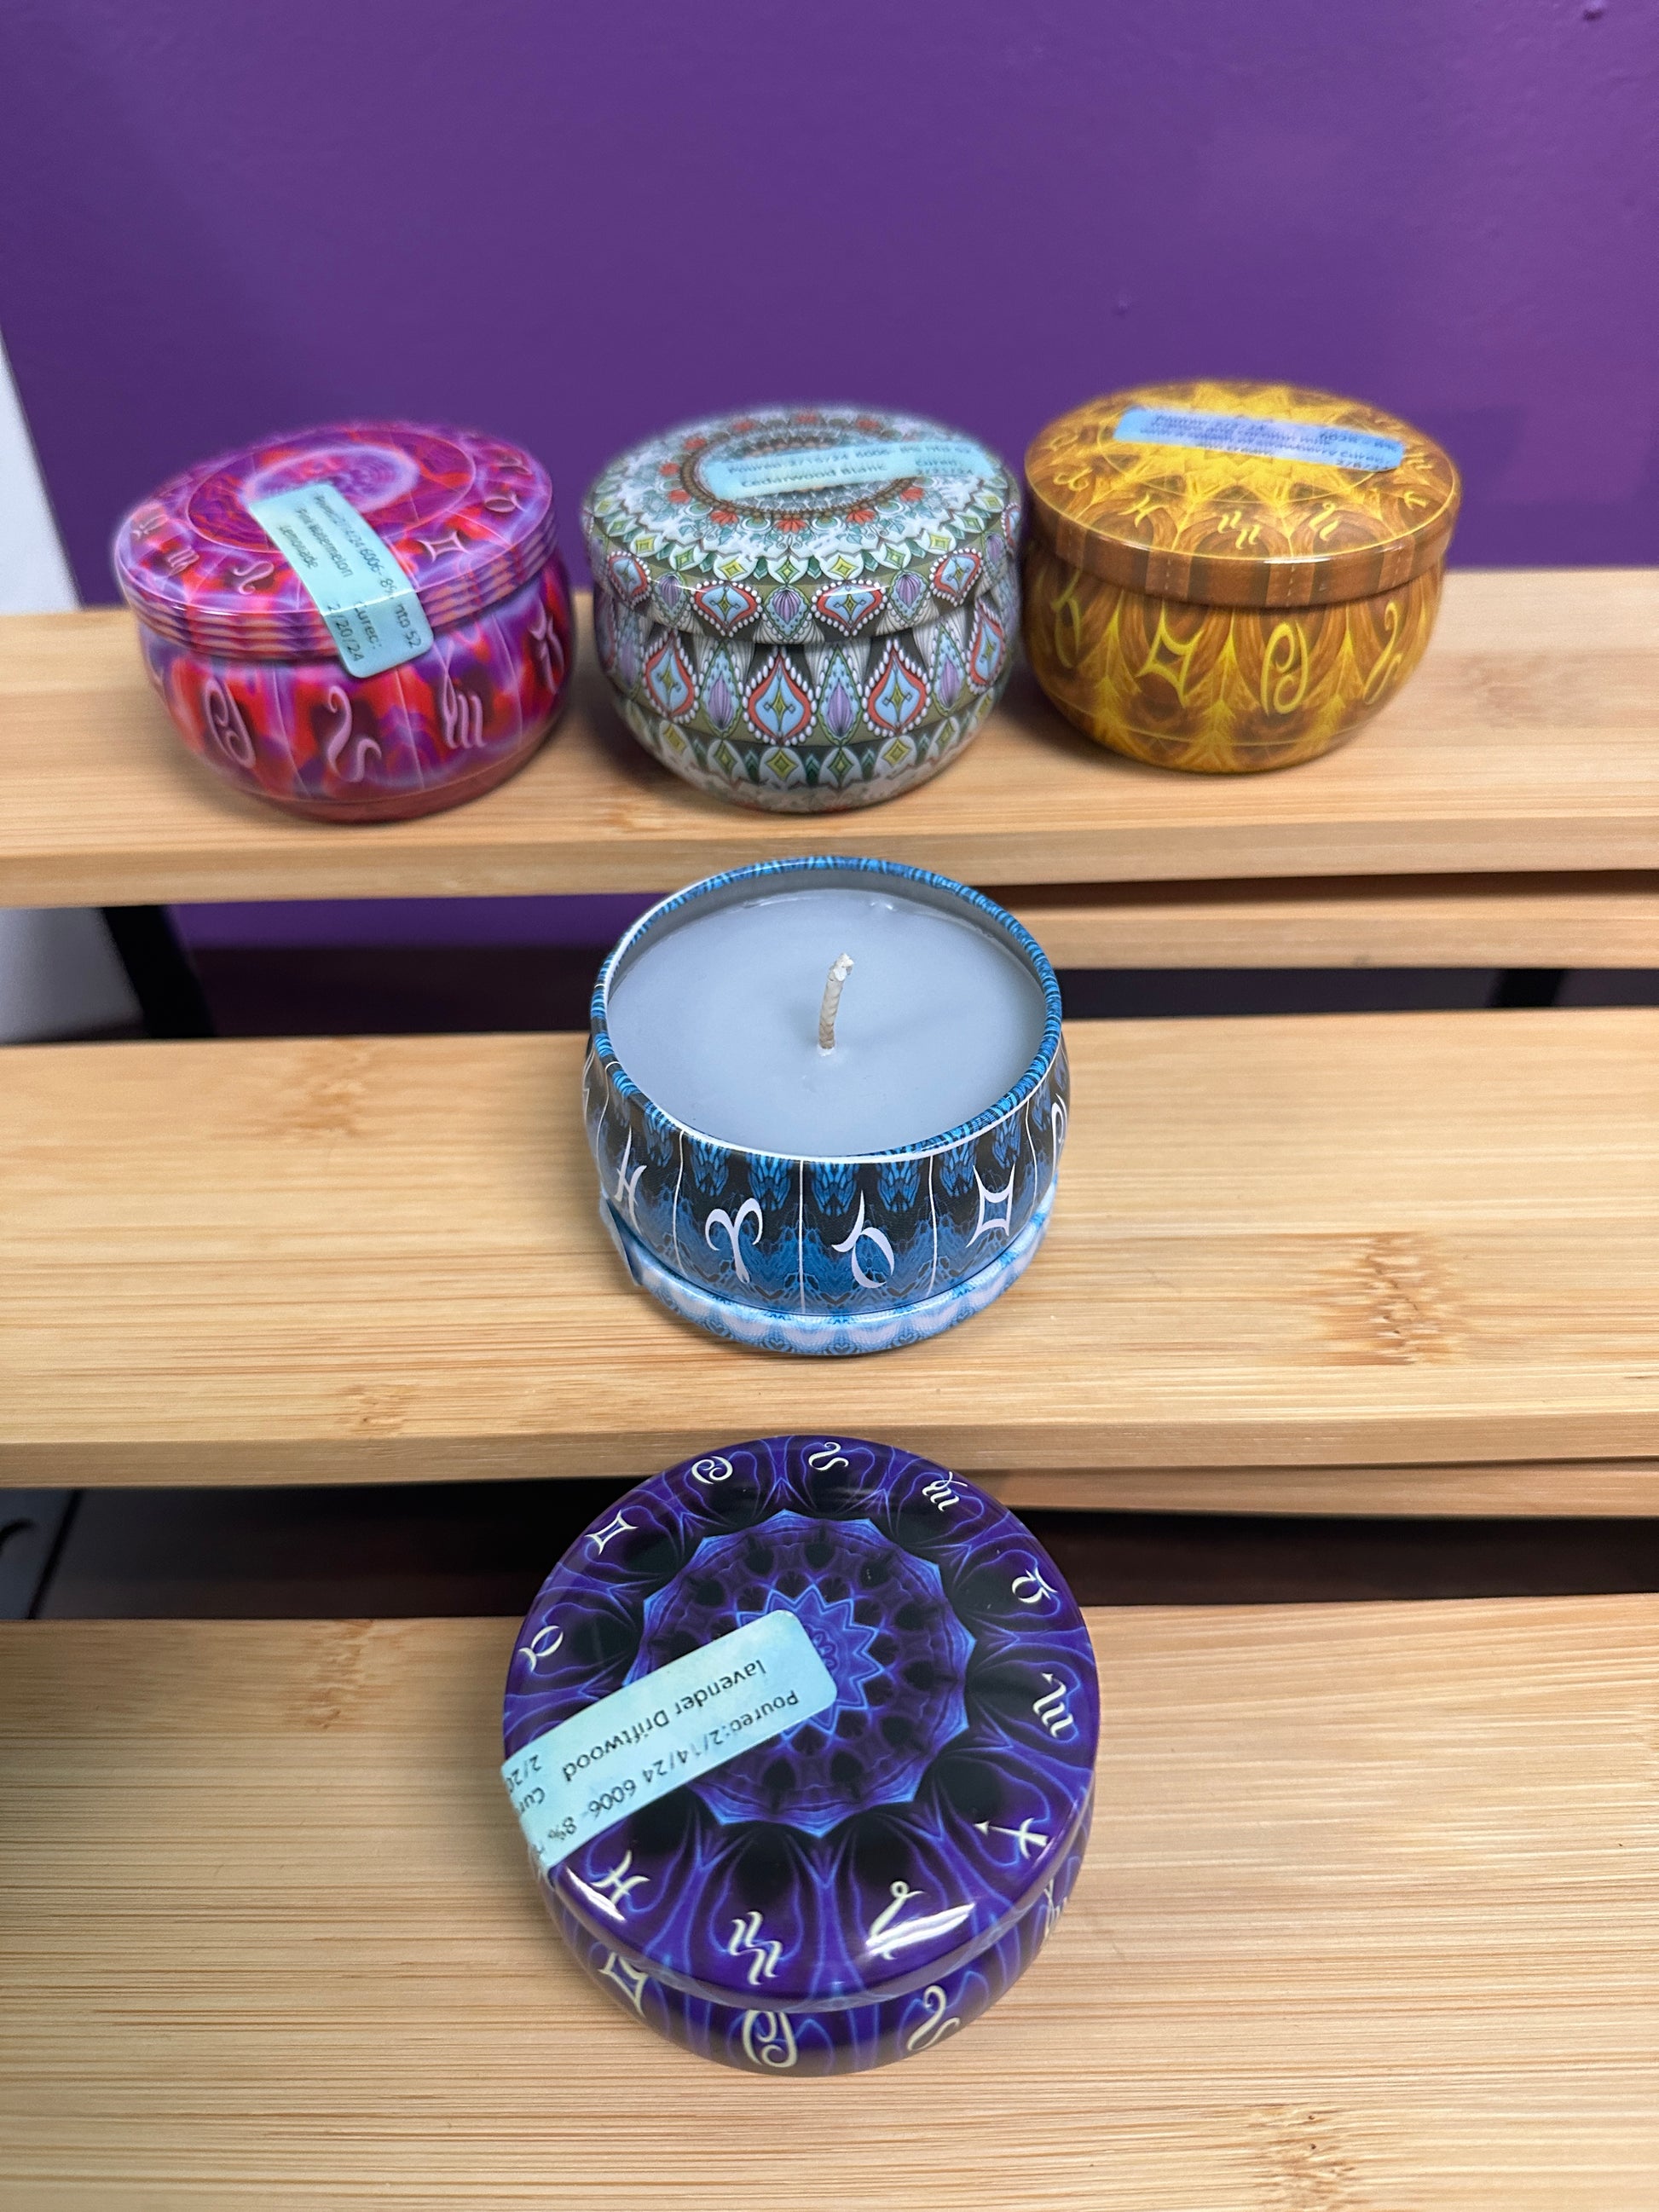 a display of 5 small candles in patterned tins. each color has a different fragrence